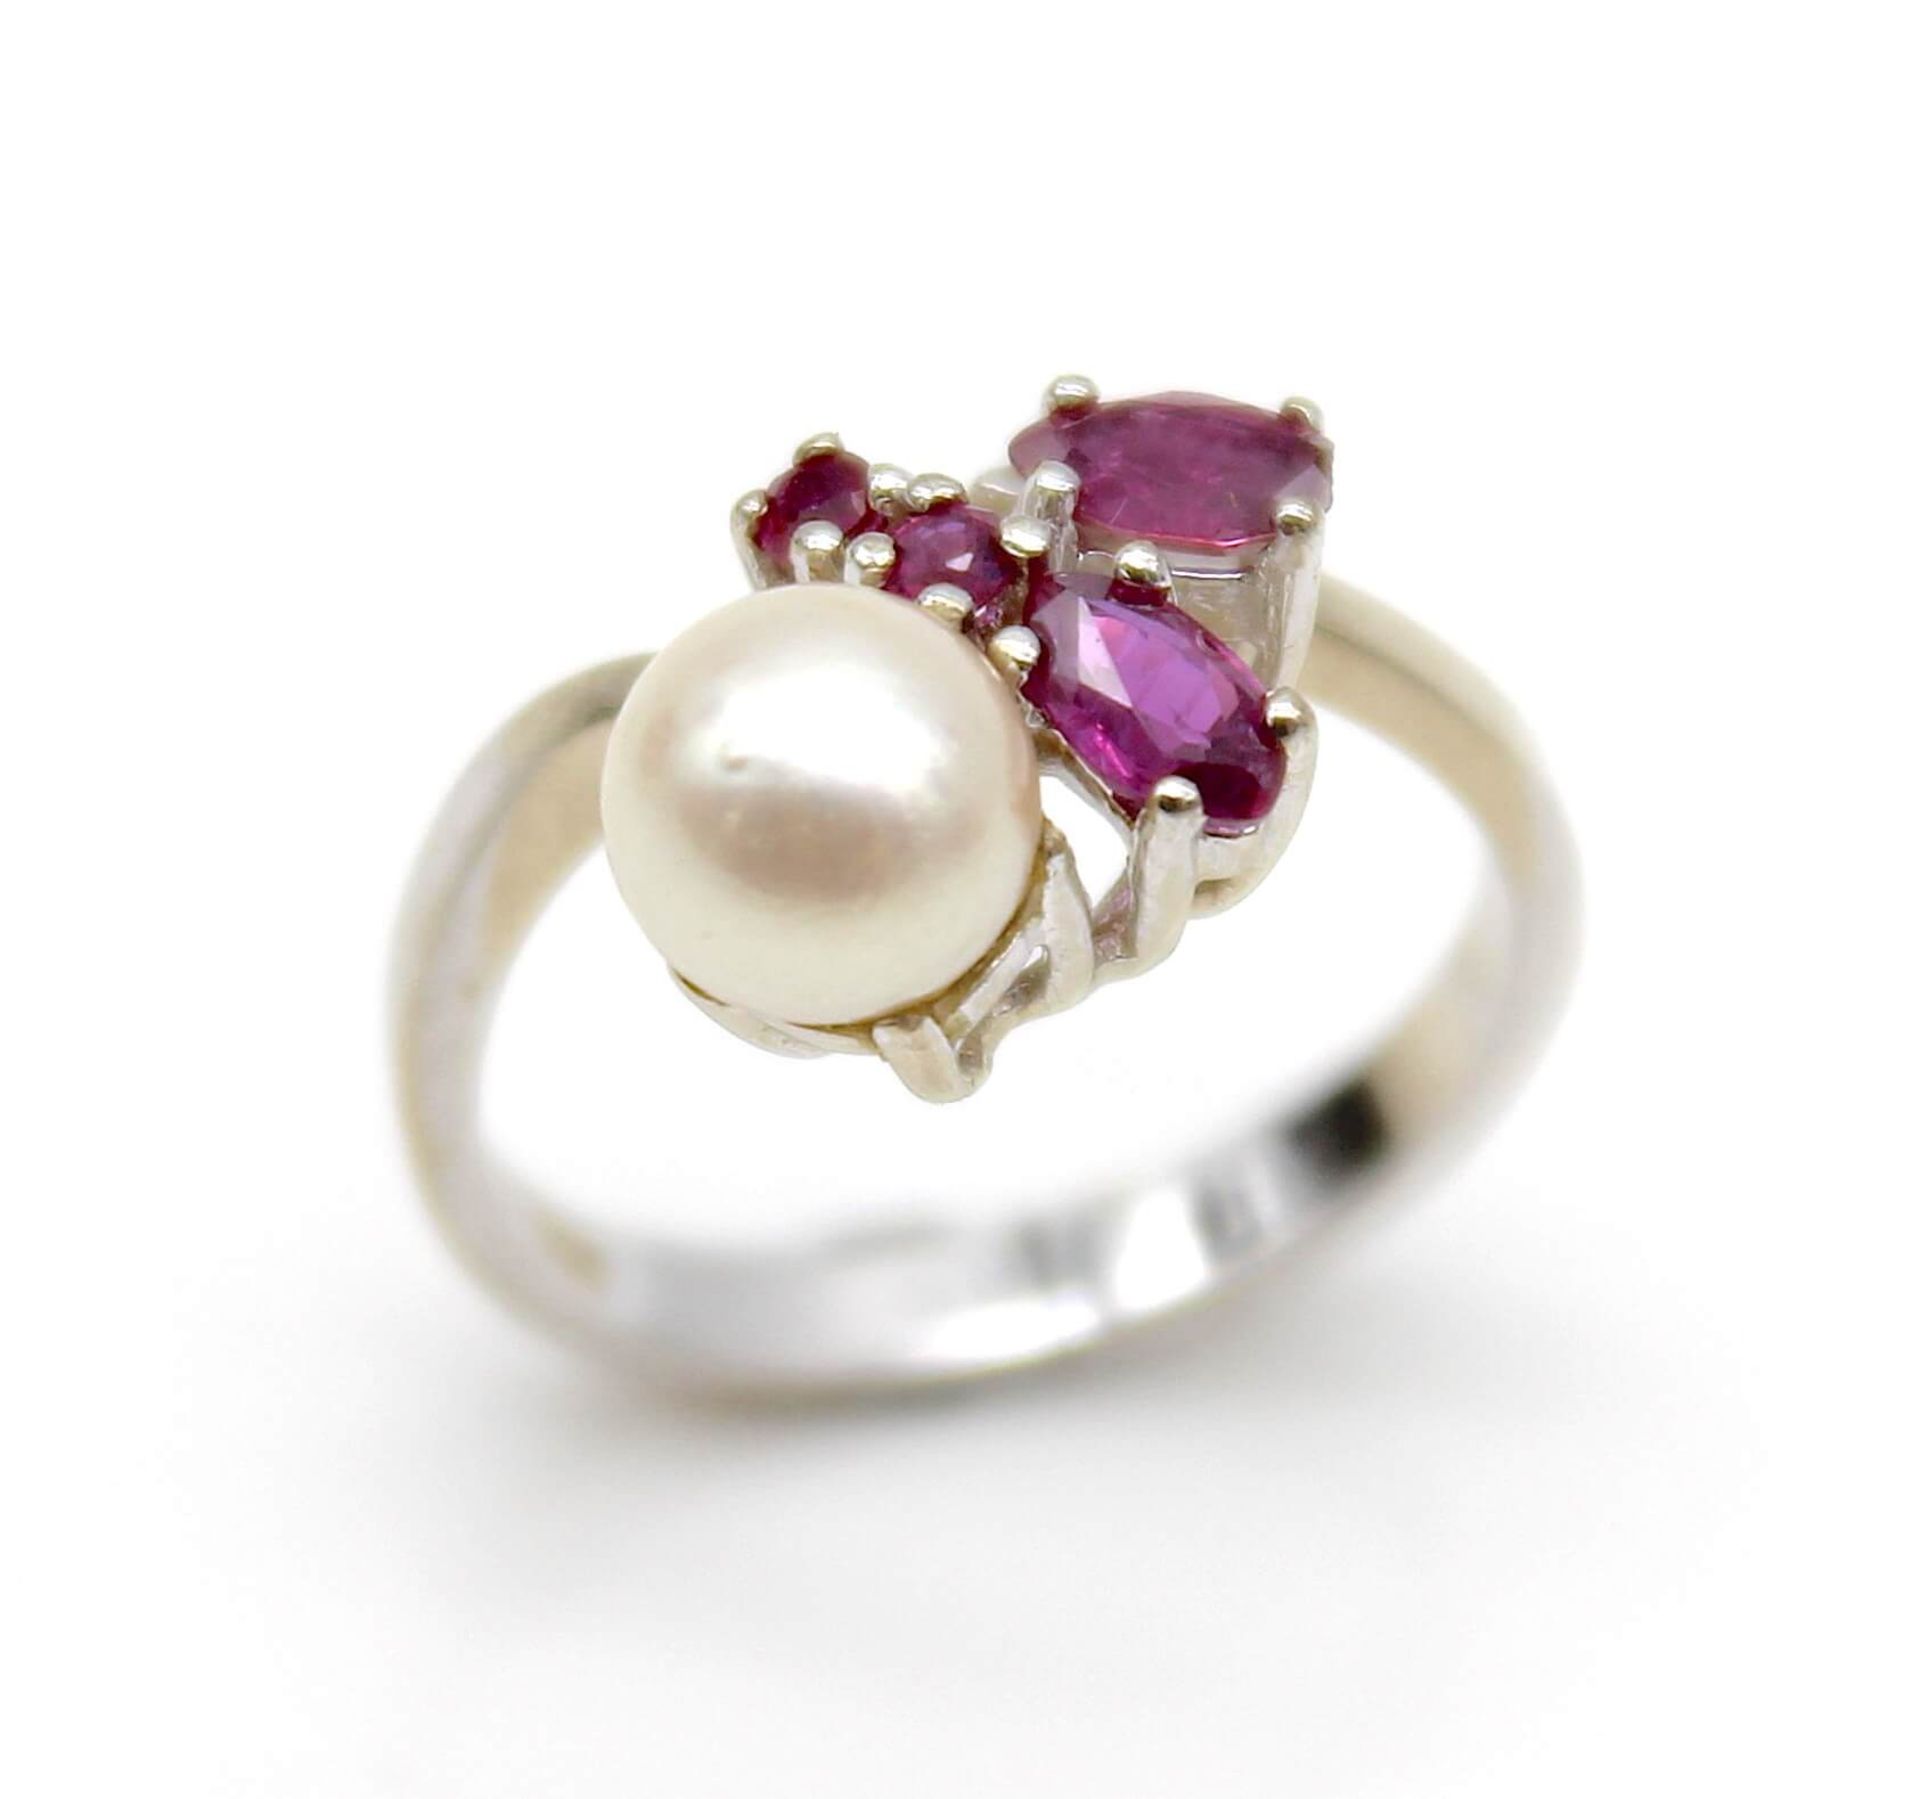 Ring with cultured pearl and rubies - Image 2 of 3